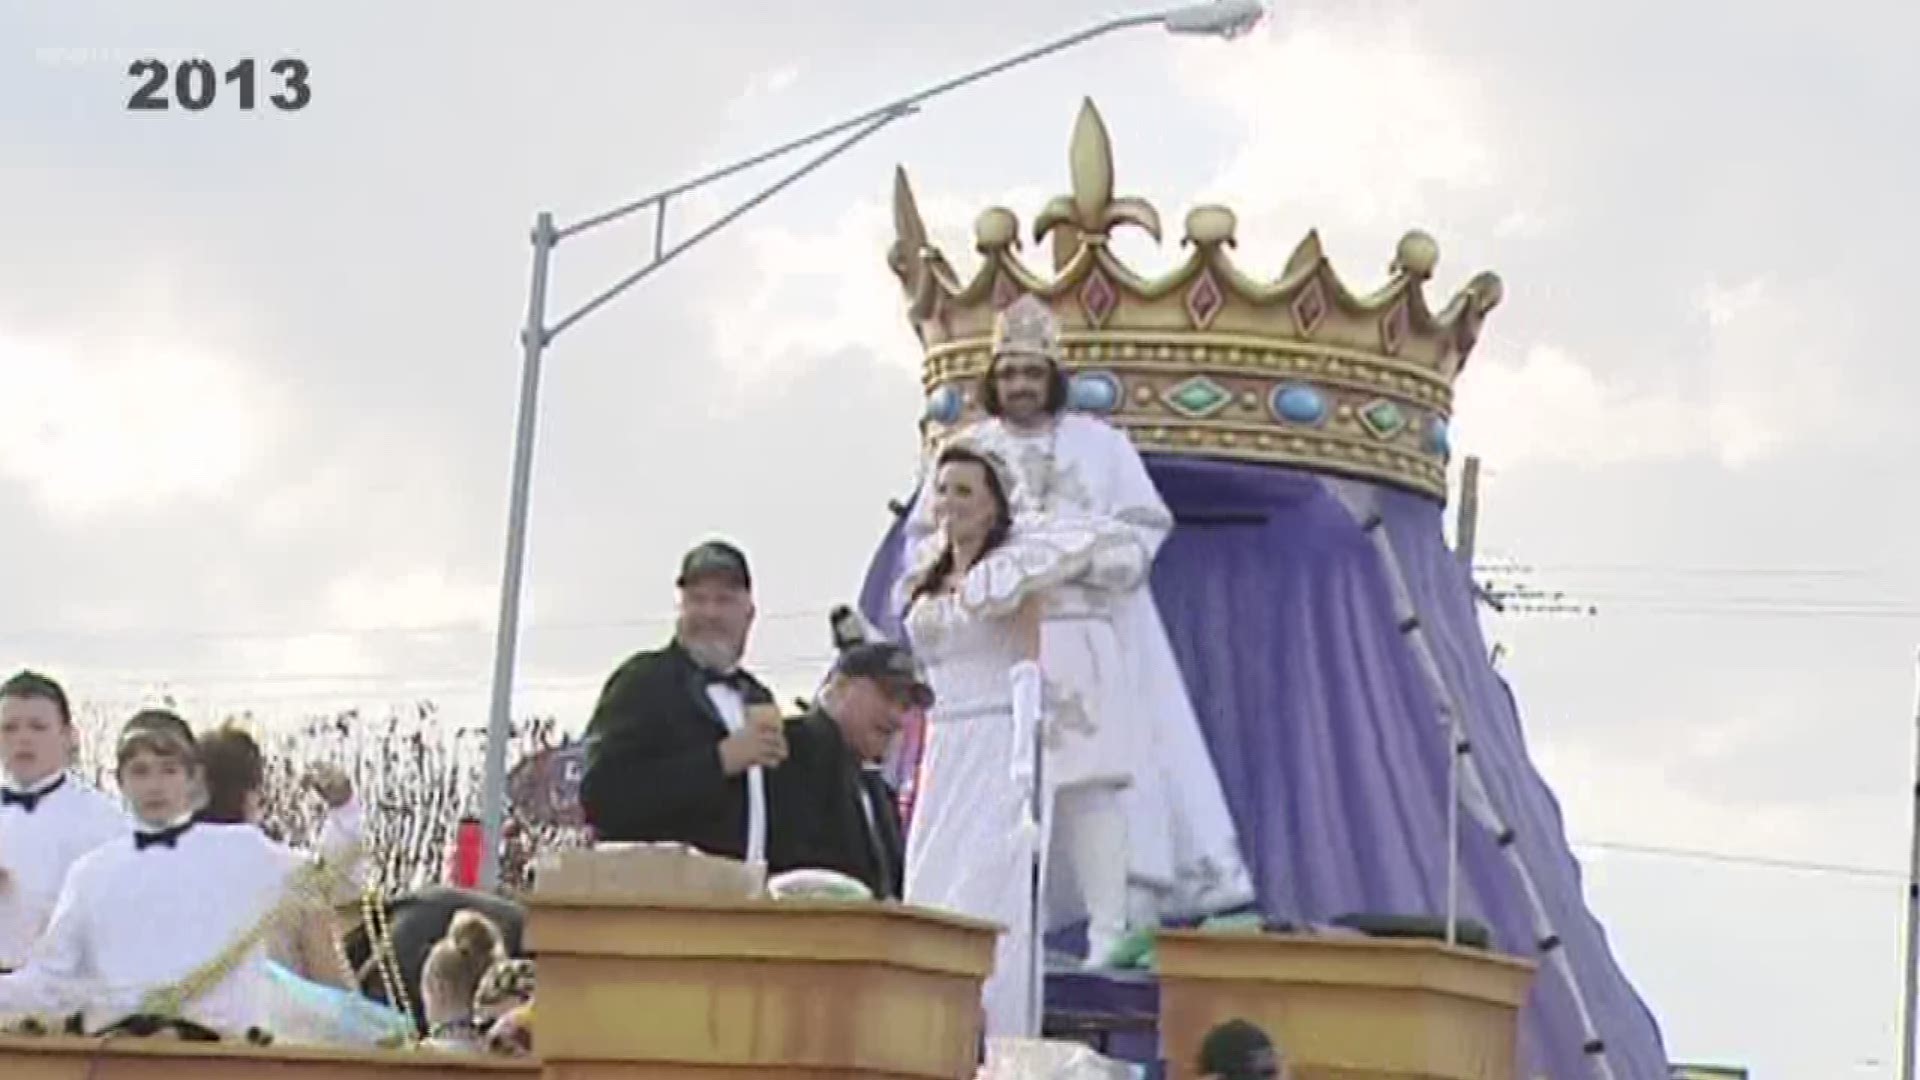 Over the years, the number of Carnival parades in Jefferson Parish dropped from 19 to 9.